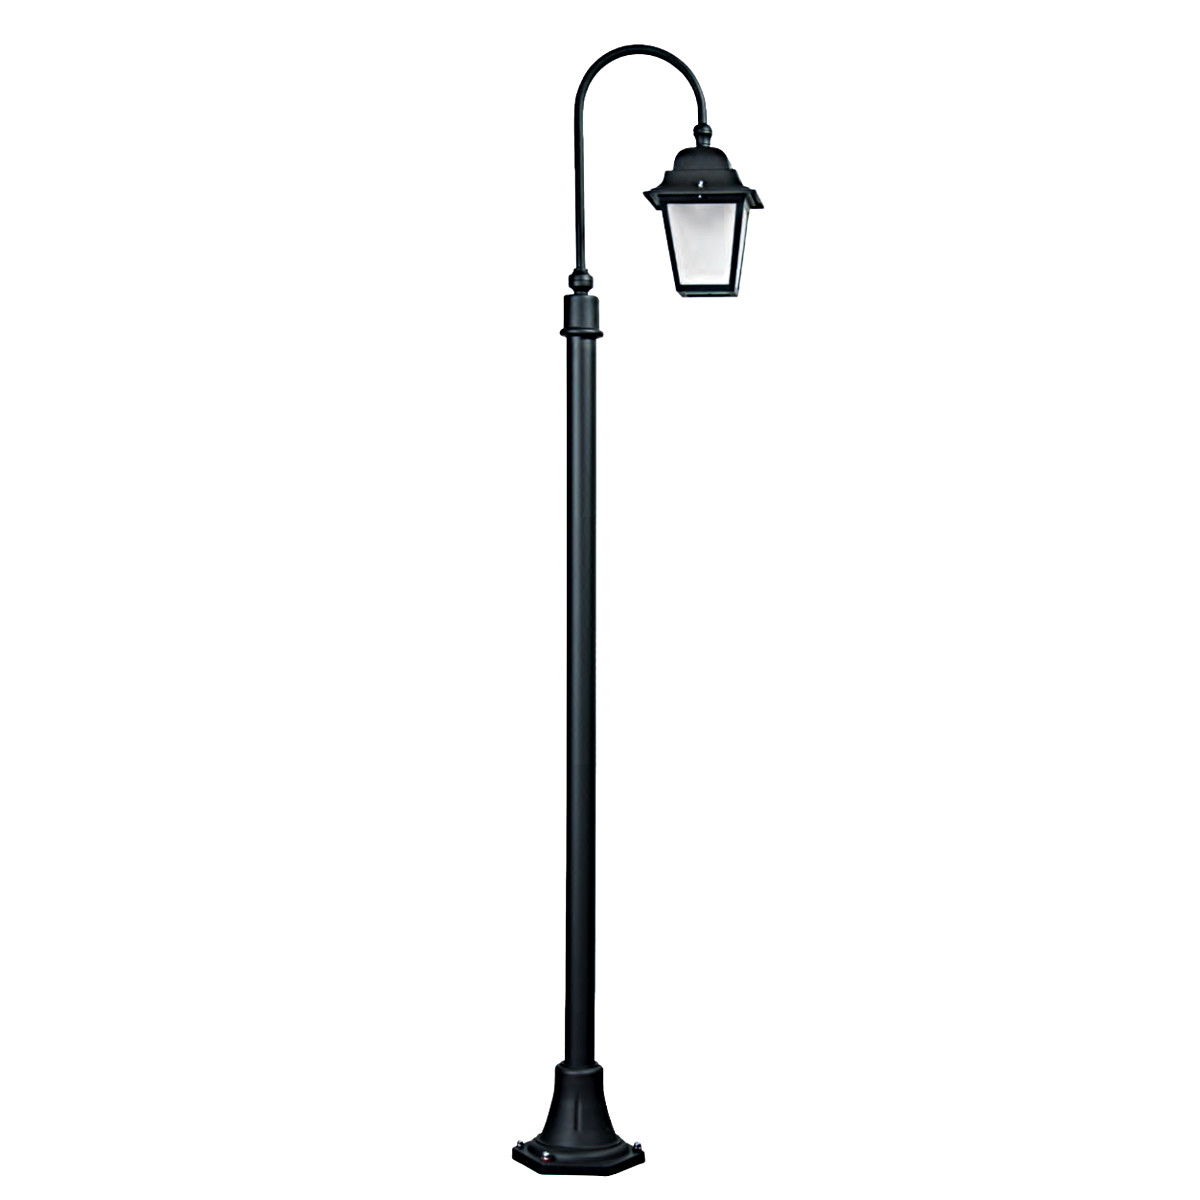 Historic Lamp Post with Lantern Hanging from Curved Arm